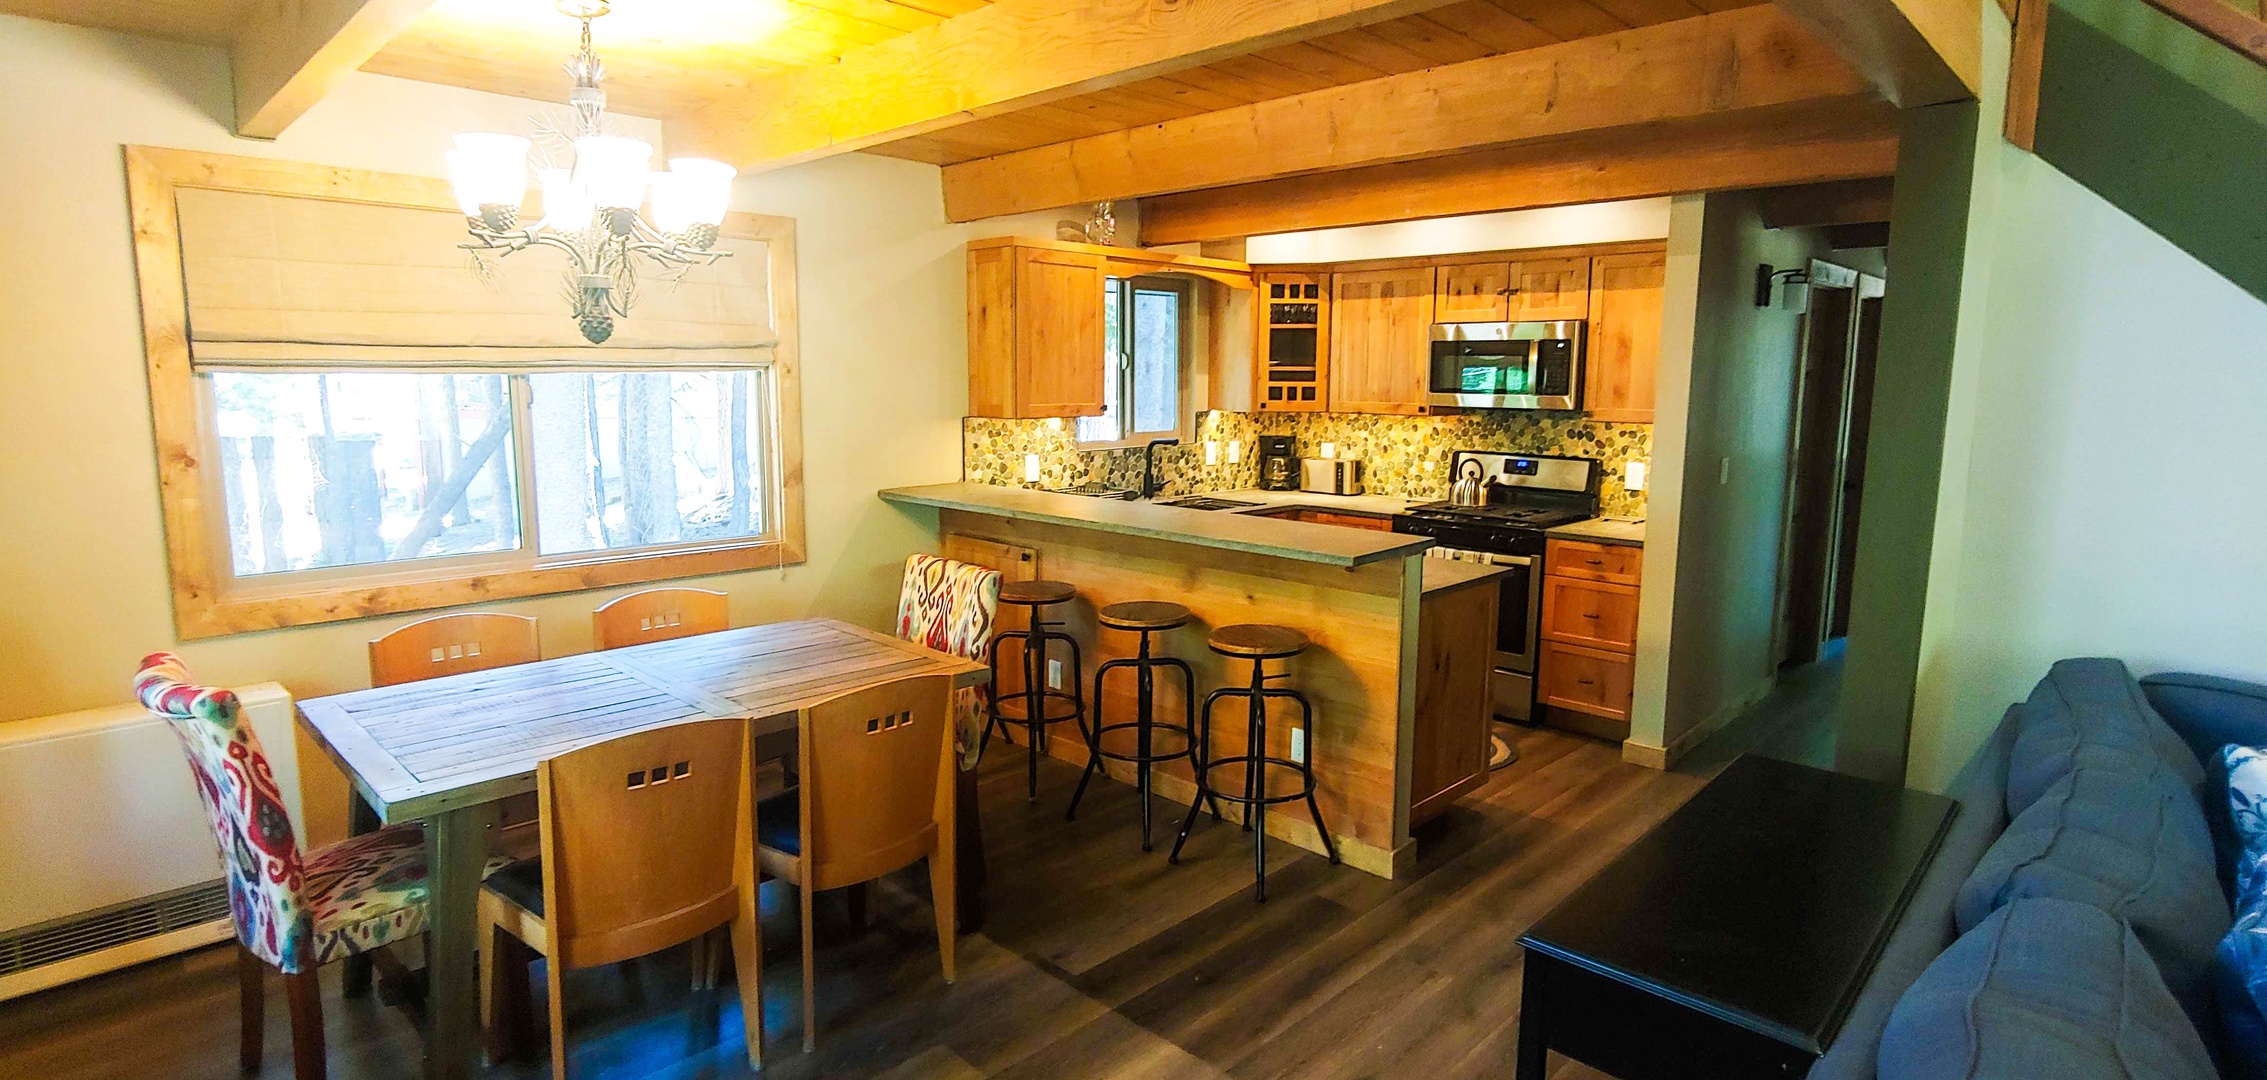 Fully equipped kitchen with additional barstool seating for 4